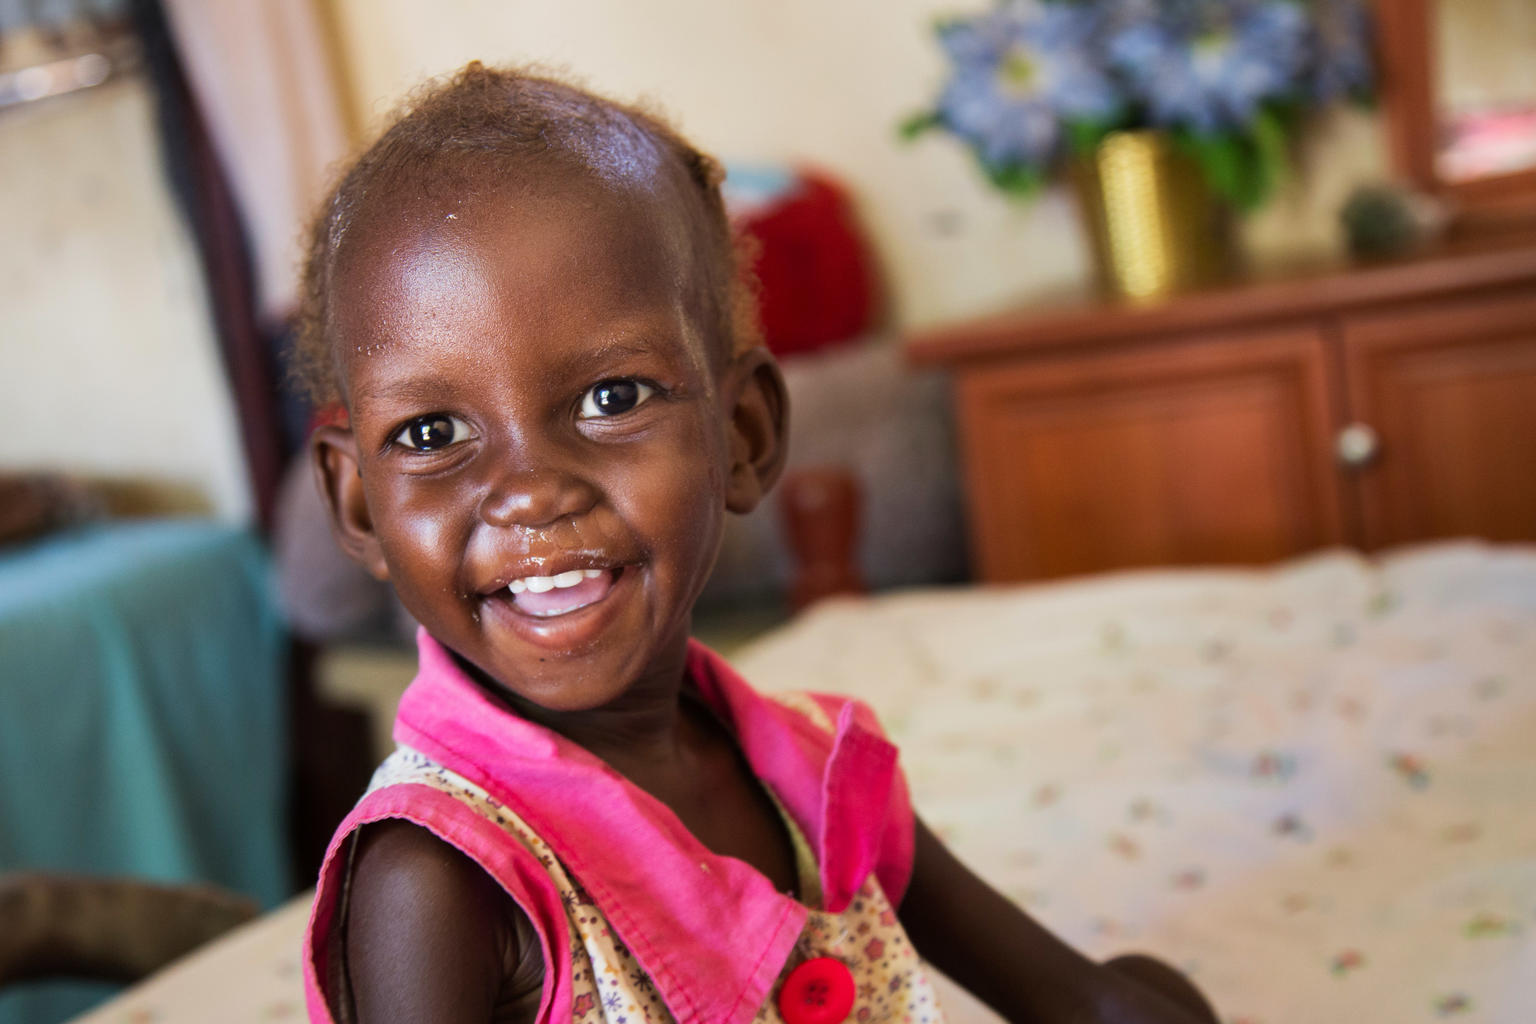 Maria John, 2, who was diagnosed with severe acute malnutrition (SAM), smiles after eating her hourly ration of Plumpy'nut, a peanut-based nutritionally enriched paste used to treat SAM, at her family's home in Juba, South Sudan, Tuesday 14 November 2017. "I can’t believe it," says Maria’s grandmother Victoria Agustino of her improved health. “I saw Maria looking so weak we weren’t sure she would come home again."